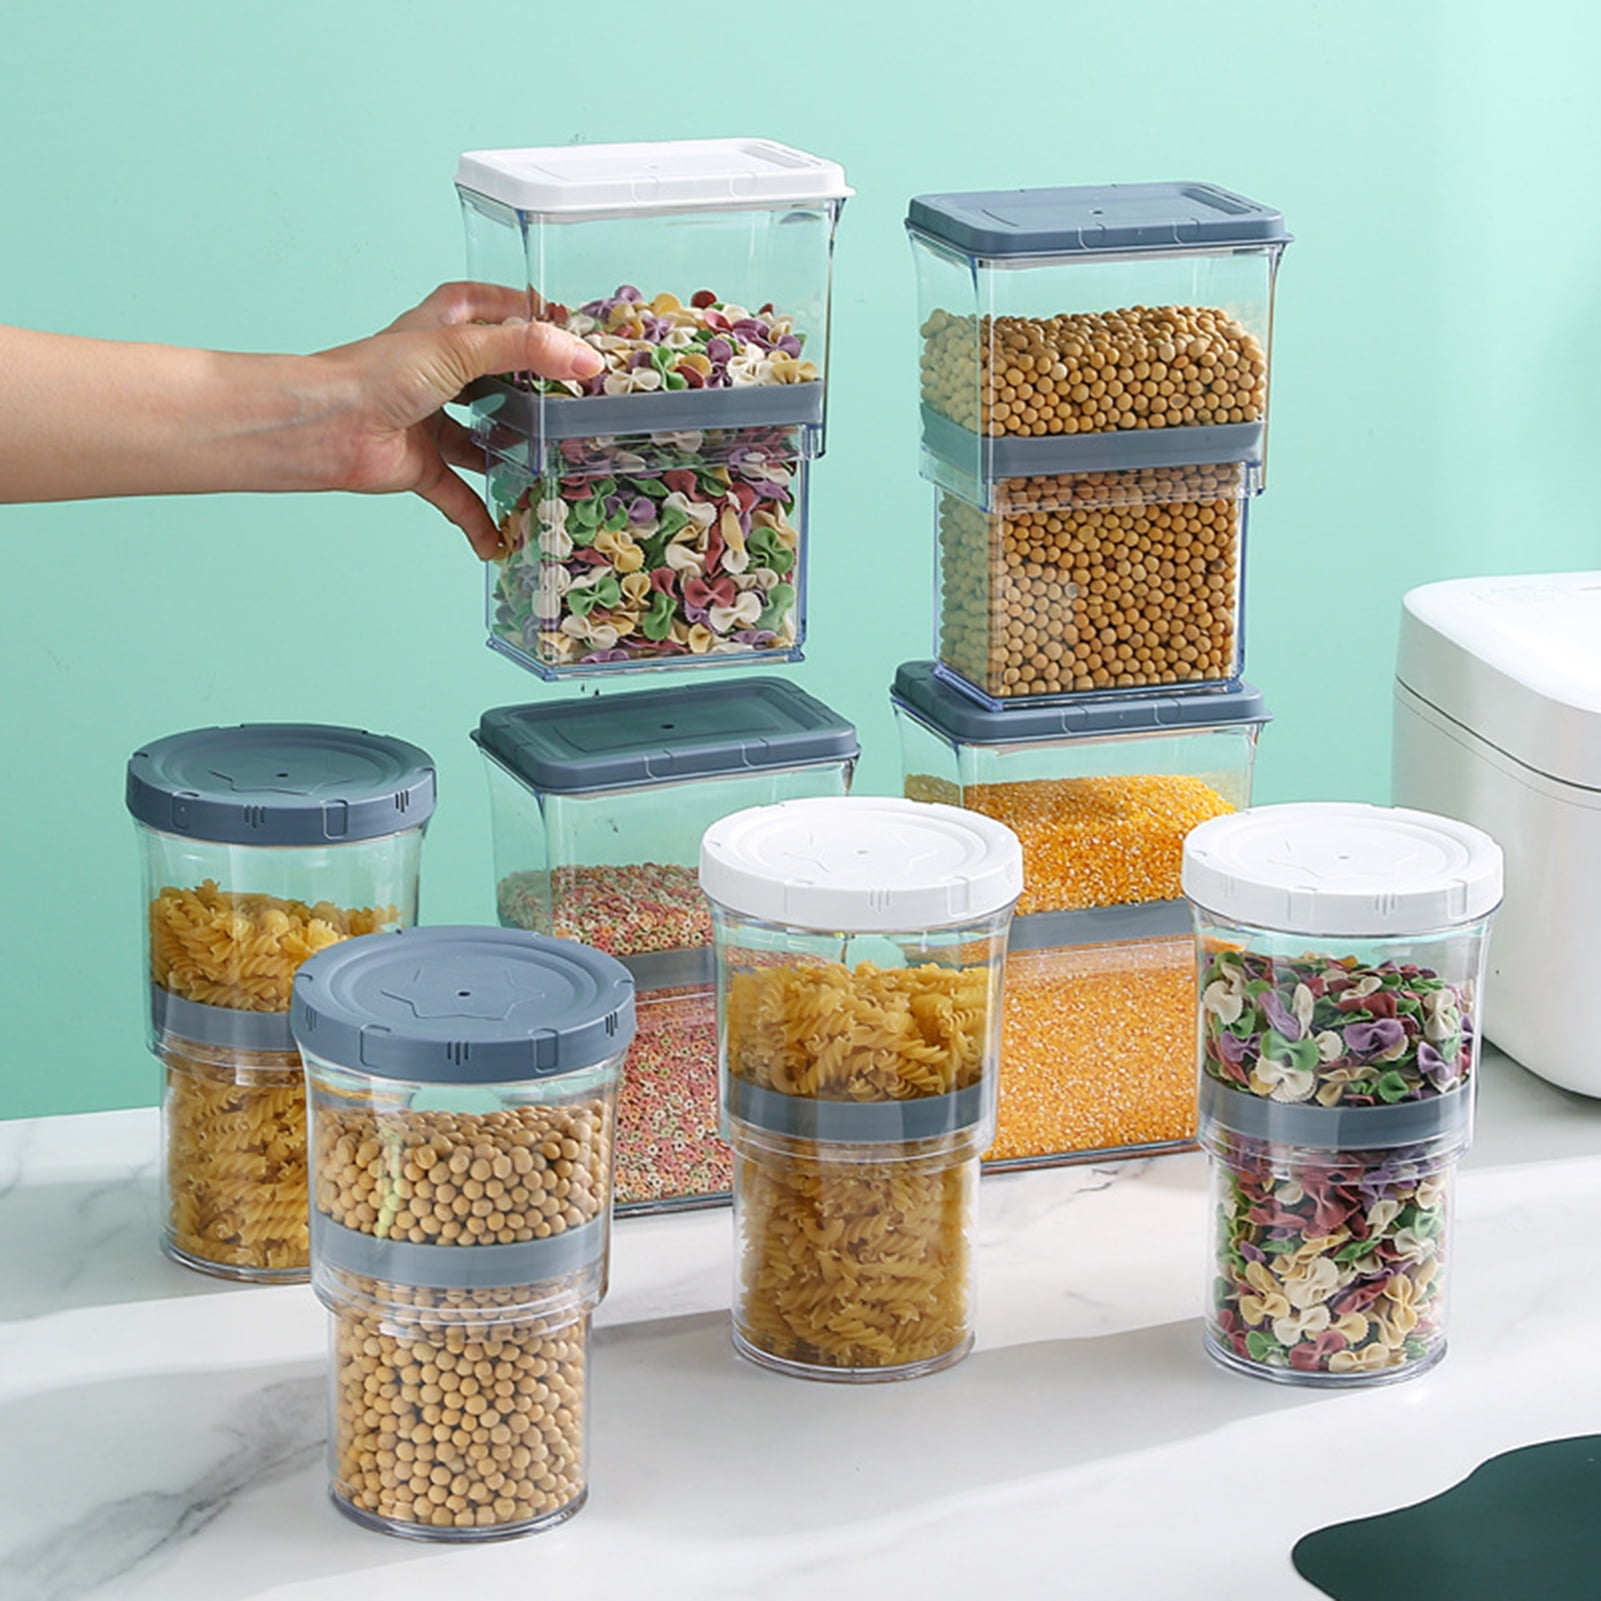 Tea Jar Storage Container Airtight Box Good Sealing High Capacity Moisture  Proof Transparent Visible Spices Dry